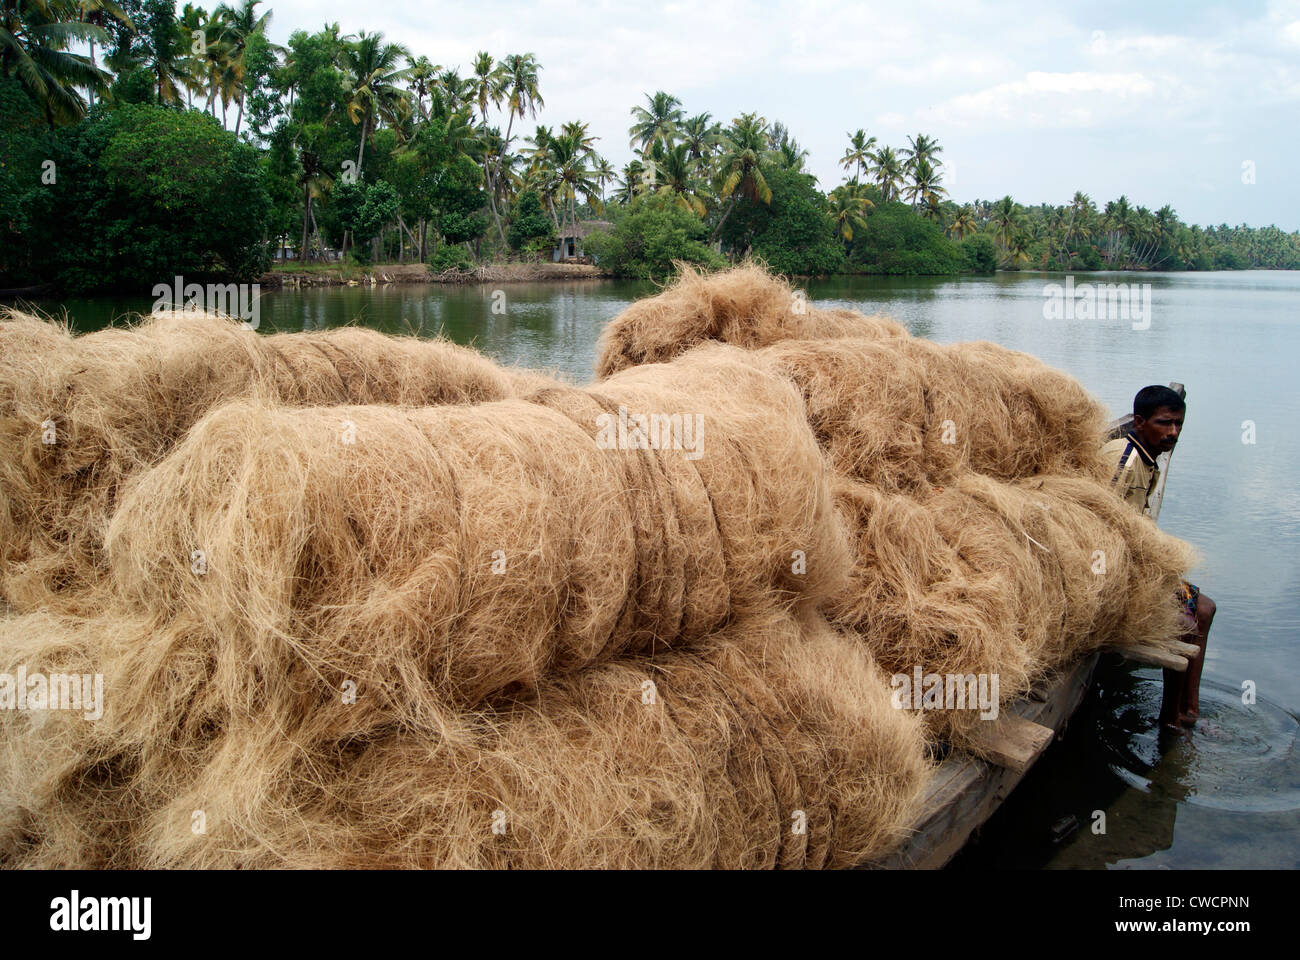 Raw Materials of Coir Products transported from Small scale Coir industries through Kerala Backwaters by Wooden Canoe Boats Stock Photo